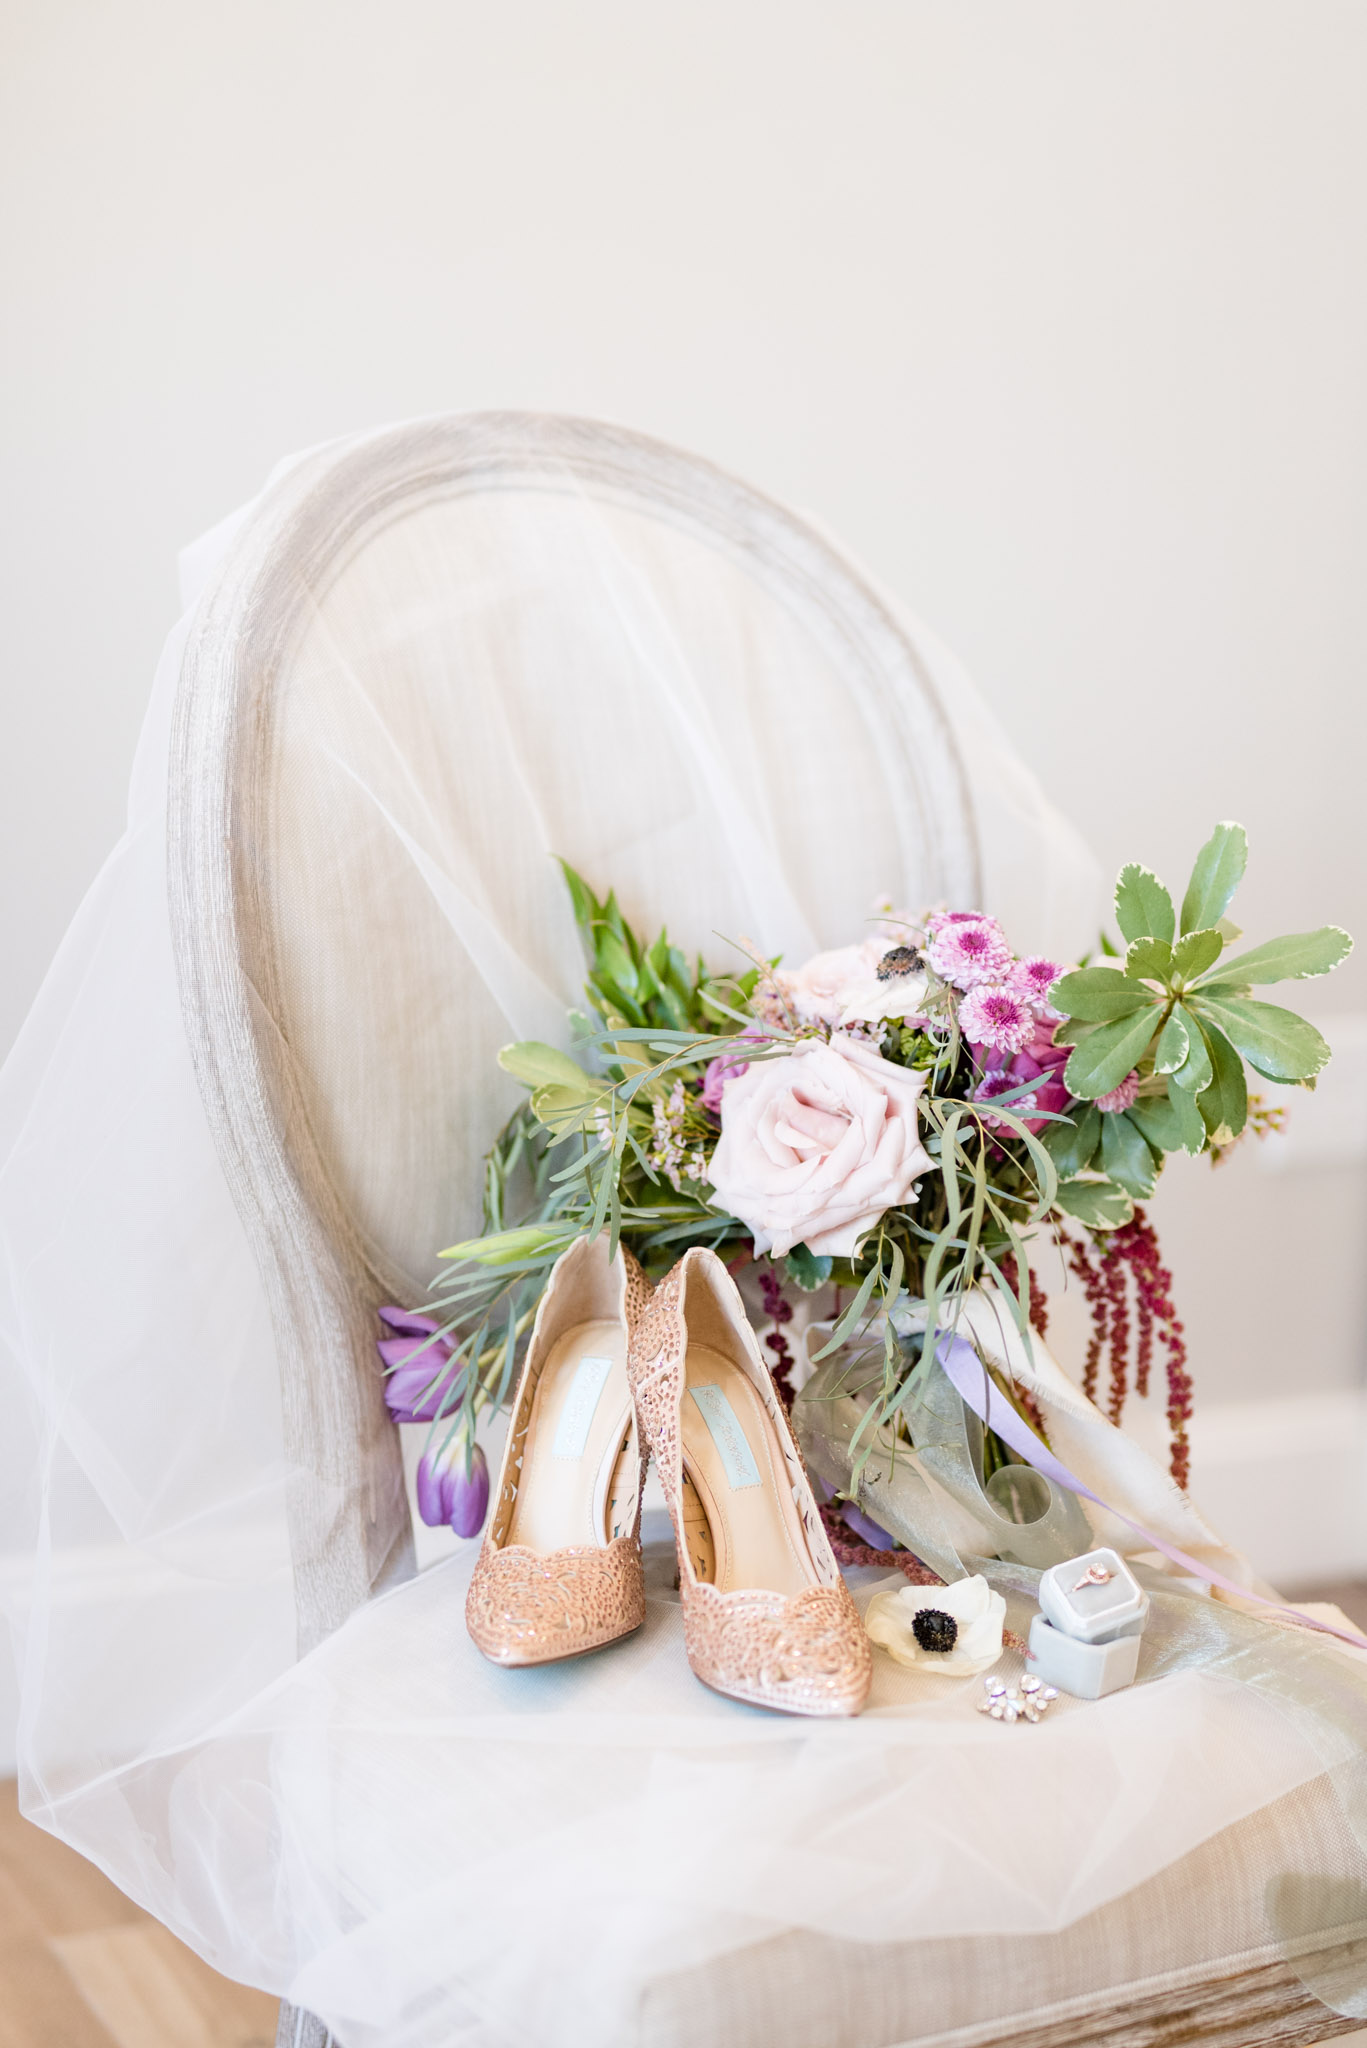 Wedding shoes and bouquet sit on chair.